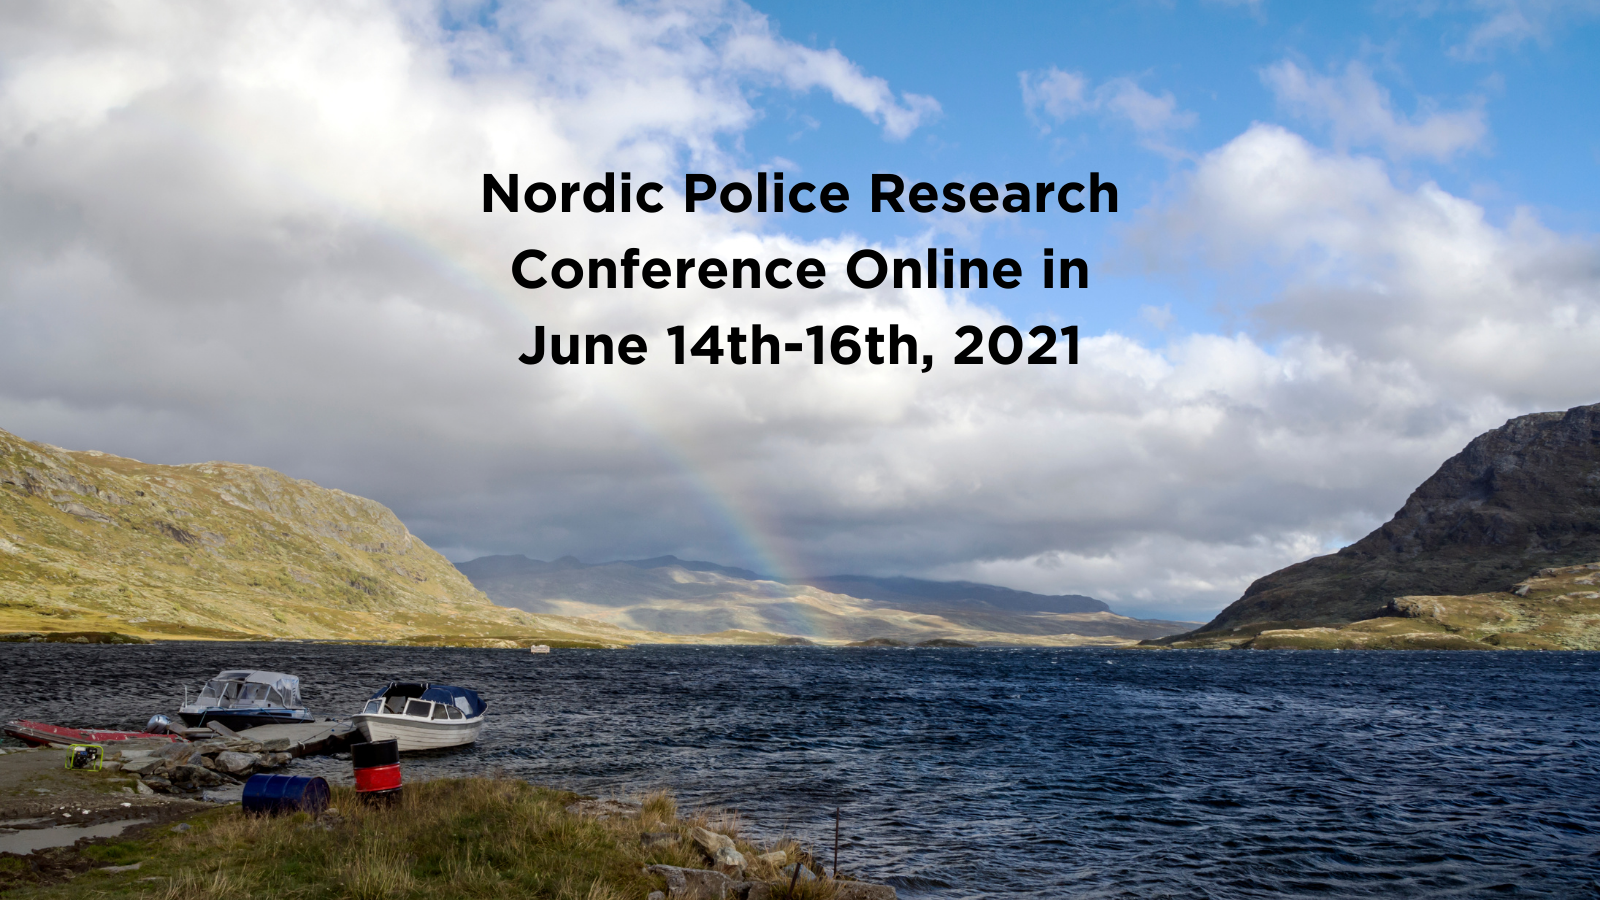 NORDIC POLICE RESEARCH CONFERENCE